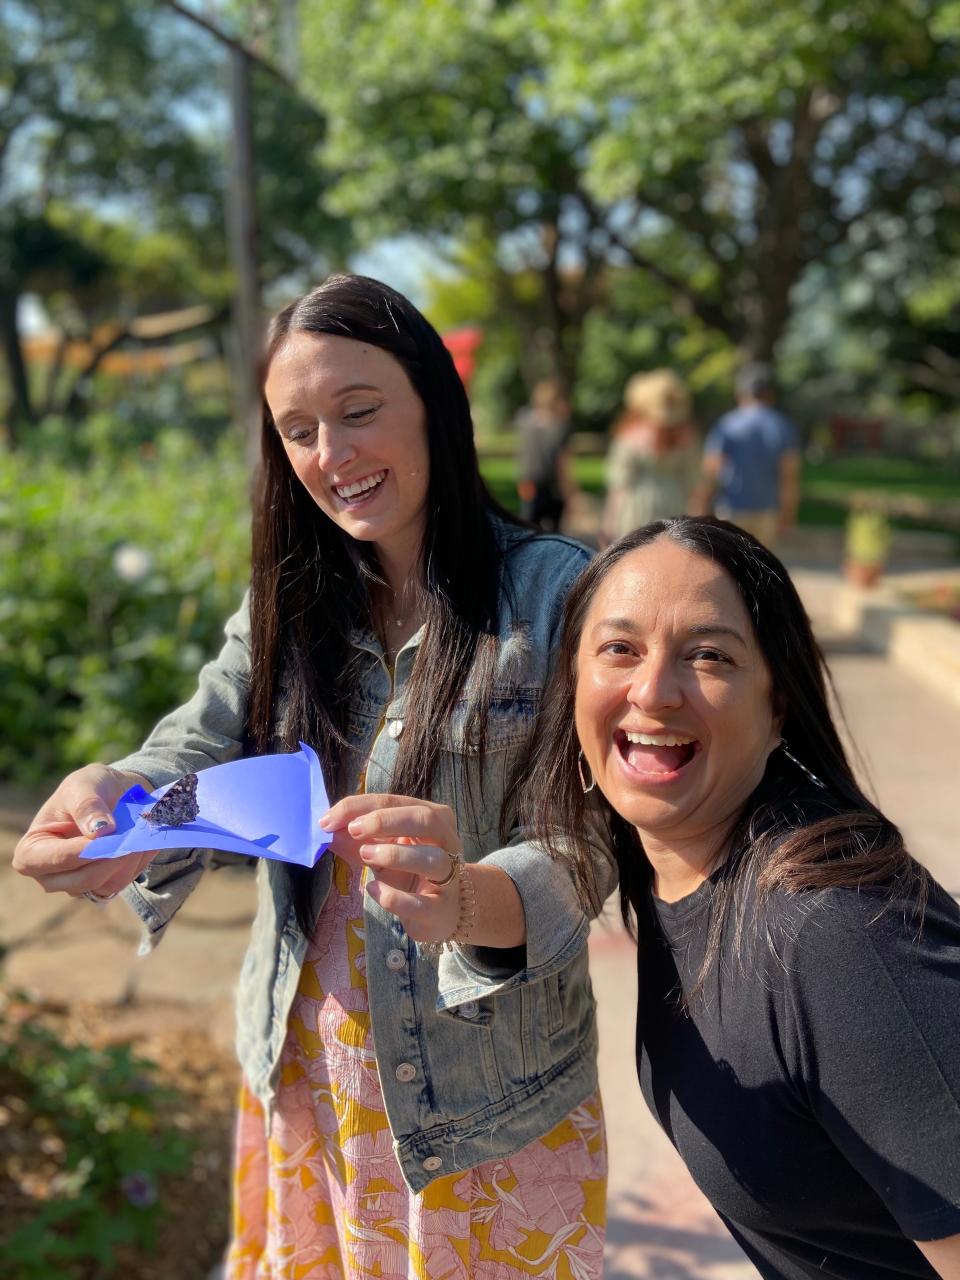 The Amarillo Botanical Gardens invites the community to experience "A Day with the Butterflies," an expansion of their annual breakfast event, scheduled to include the traditional breakfast, and butterfly releases as well as live music, food trucks, vendors, arts and crafts, educational demonstrations and much more this Saturday at the gardens.